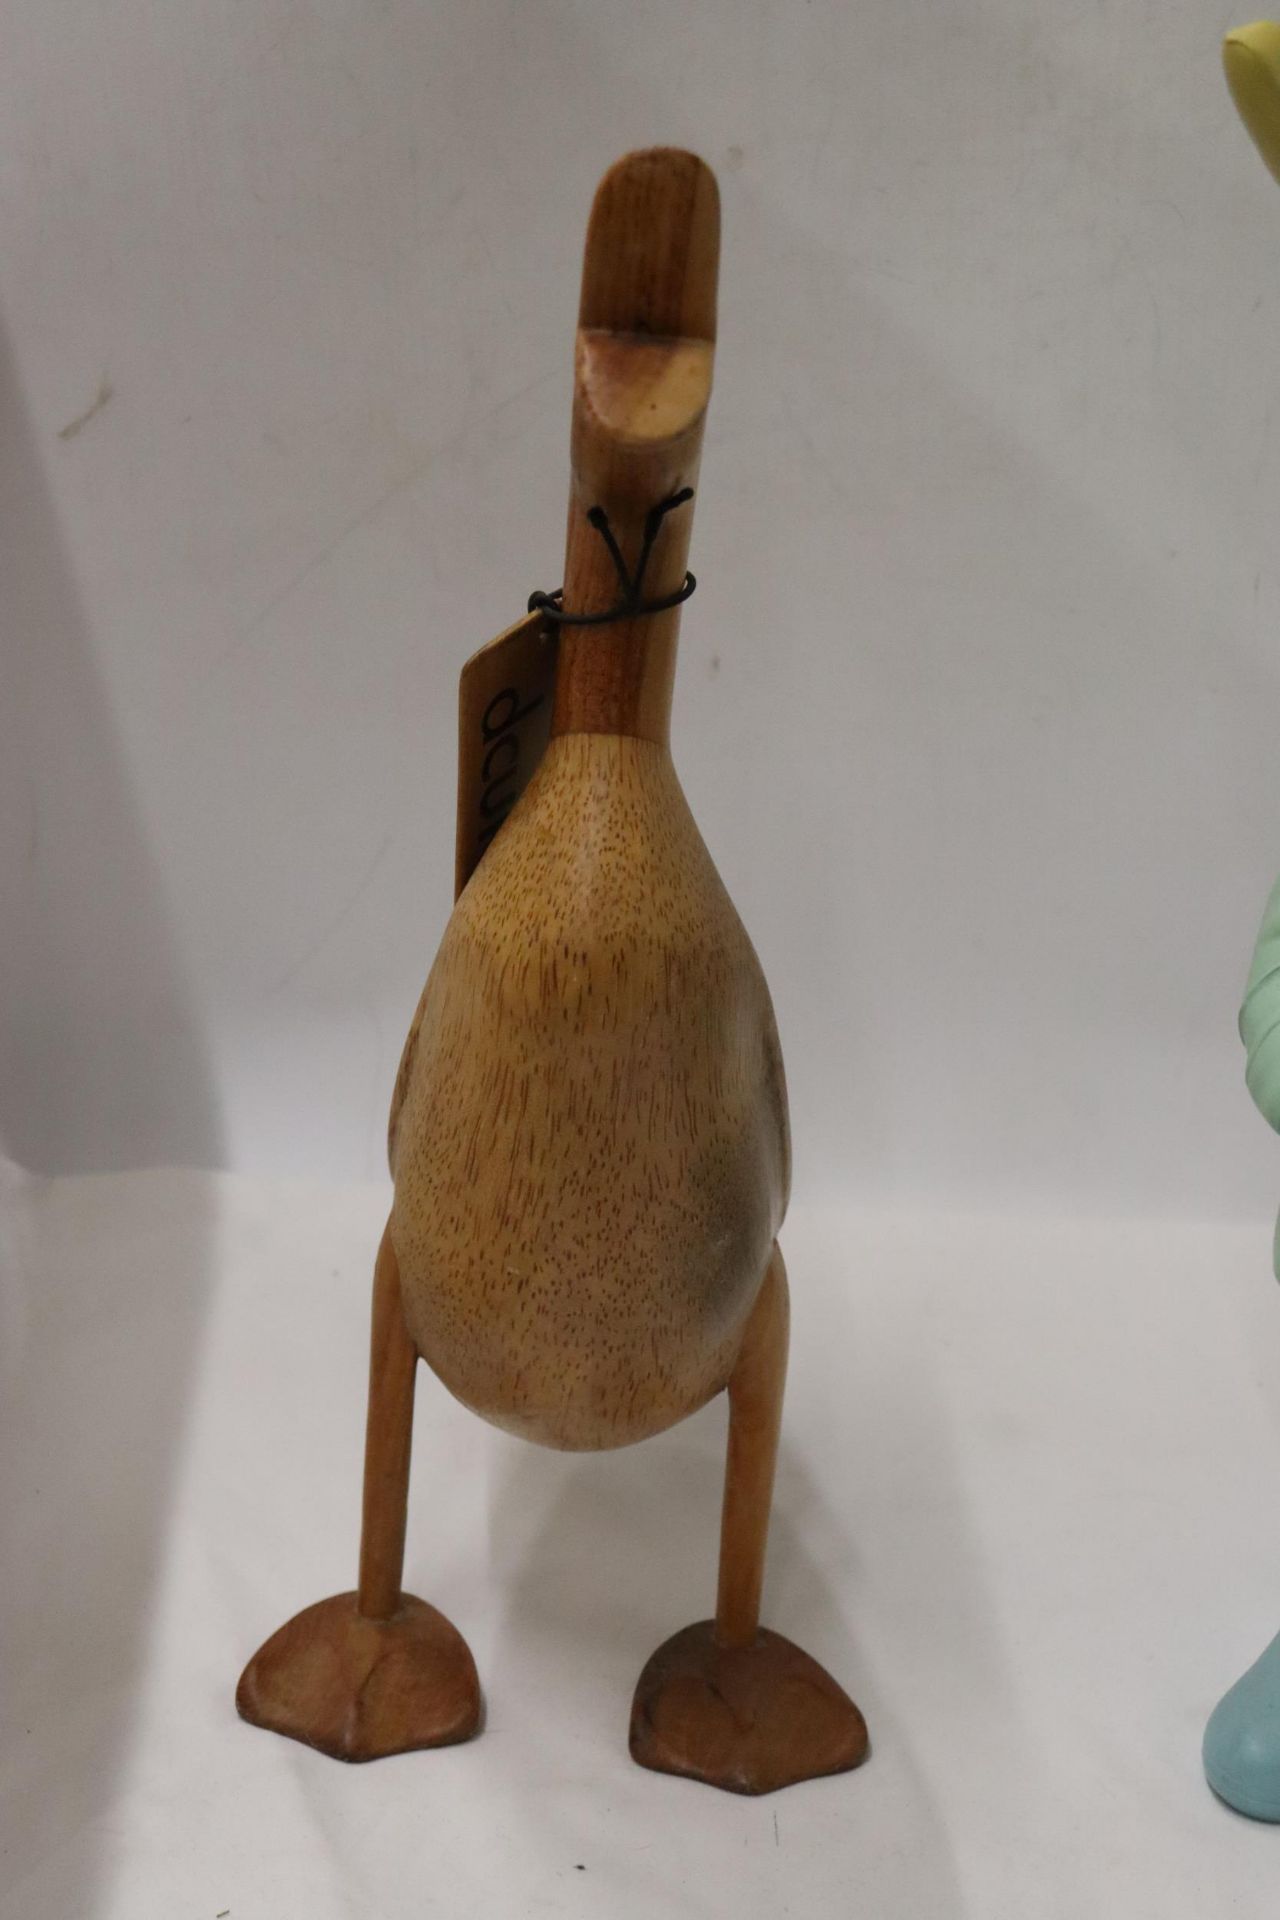 A WOODEN DUCK FROM 'THE DUCK COMPANY' CALLED FRED PLUS A PAINTED DUCK, HEIGHTS 42CM - Image 6 of 7